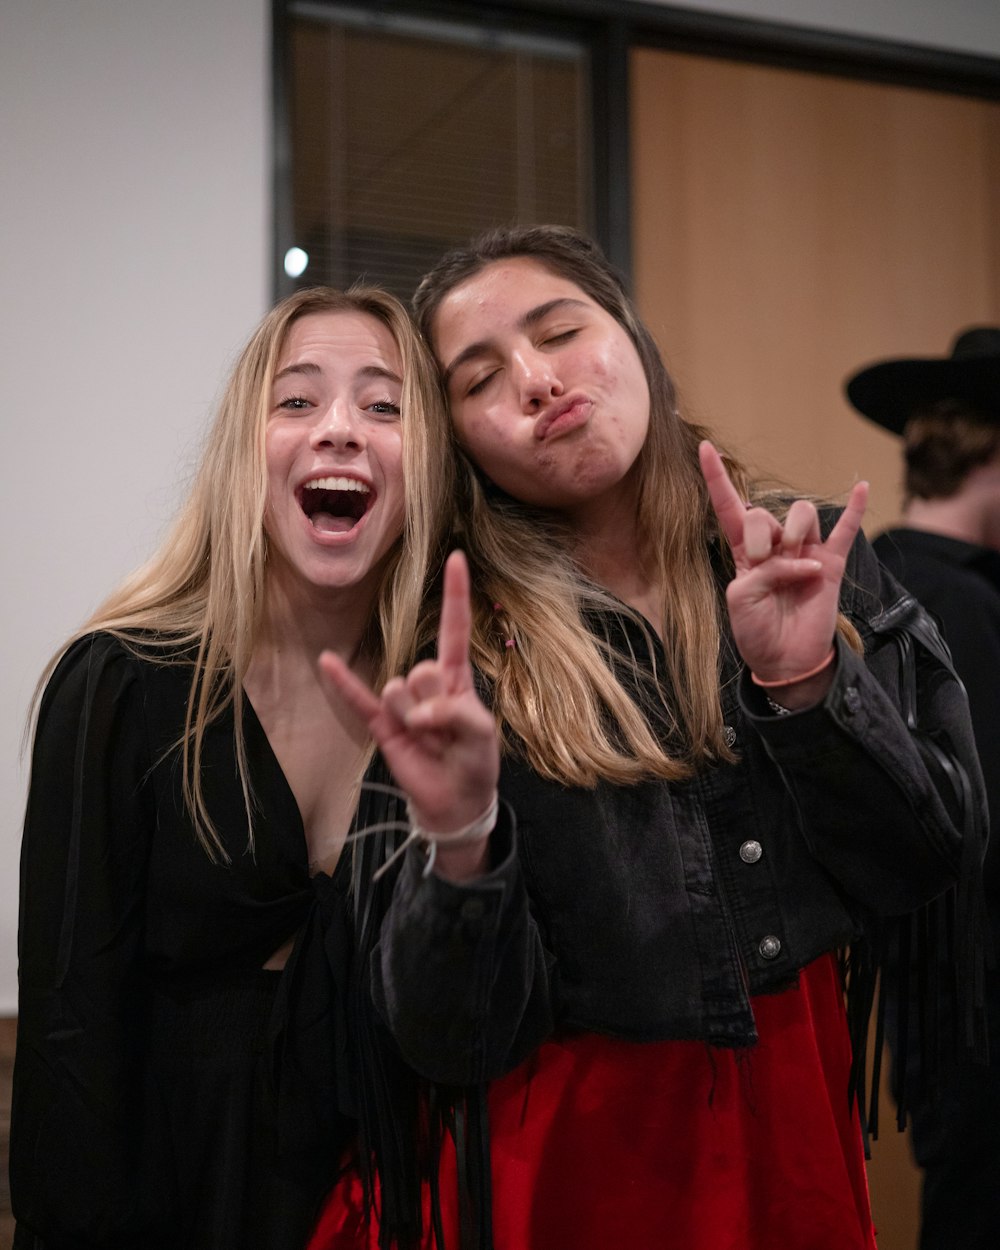 two young women making a peace sign with their hands